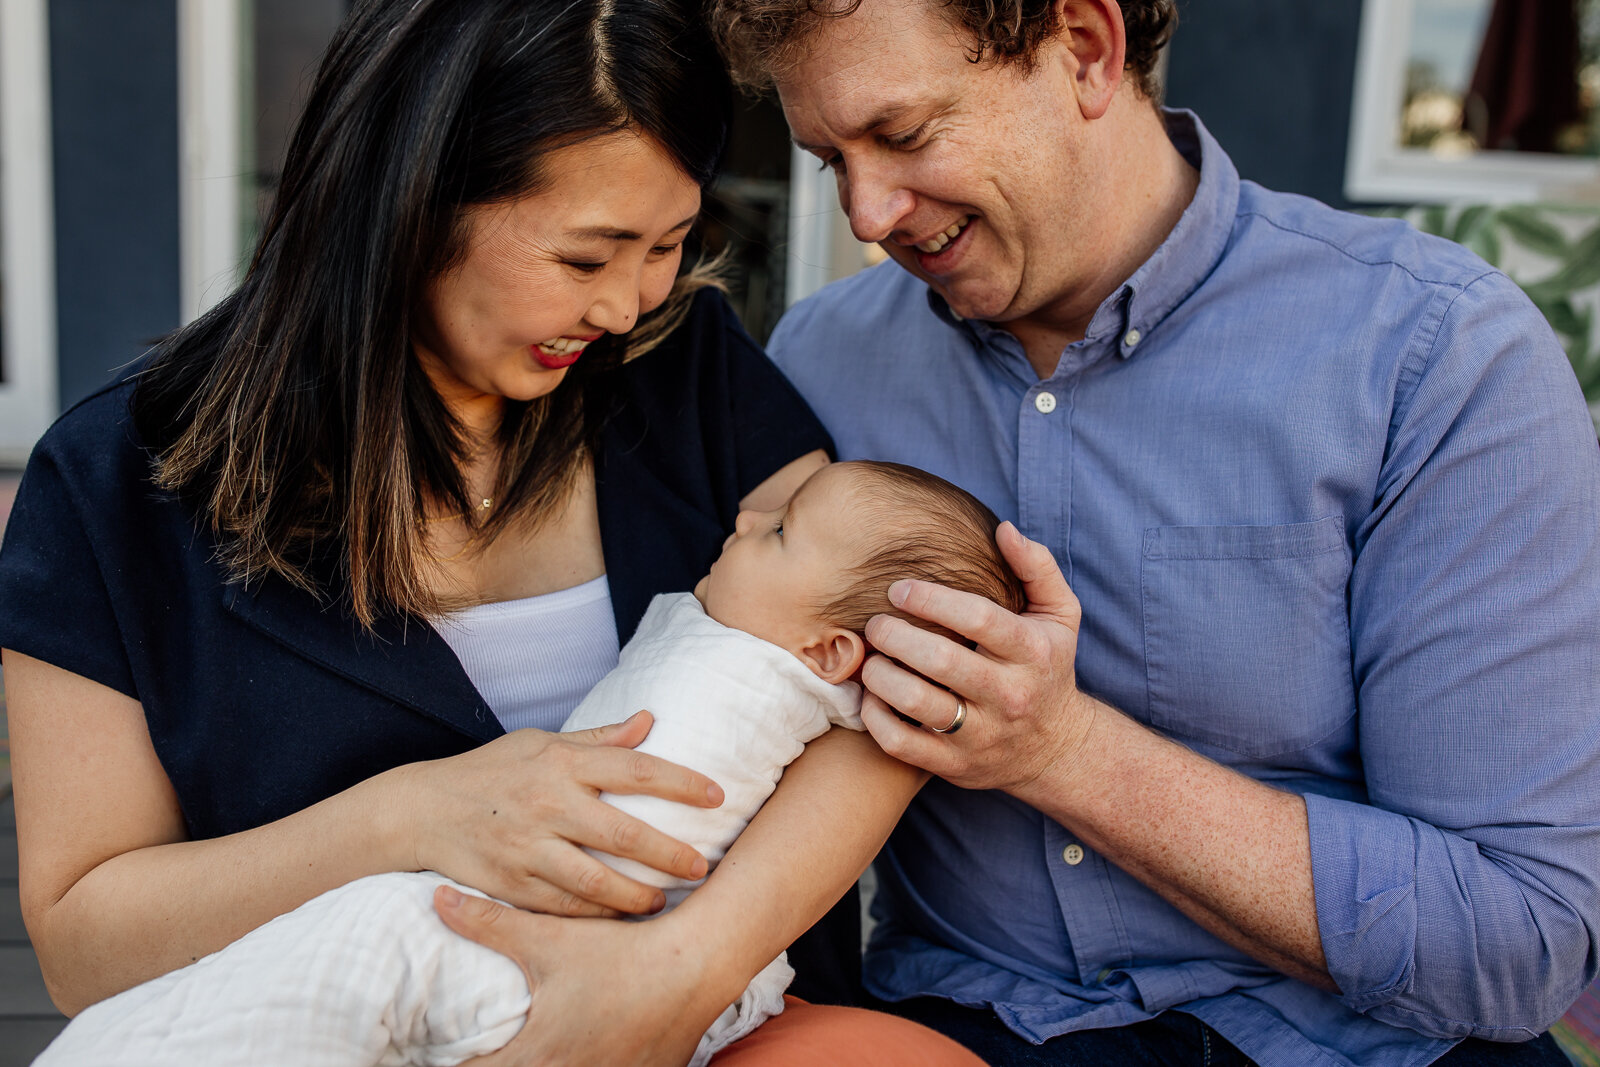 parents looking down and smiling while mom holds new baby - Bay Area Newborn Photographer